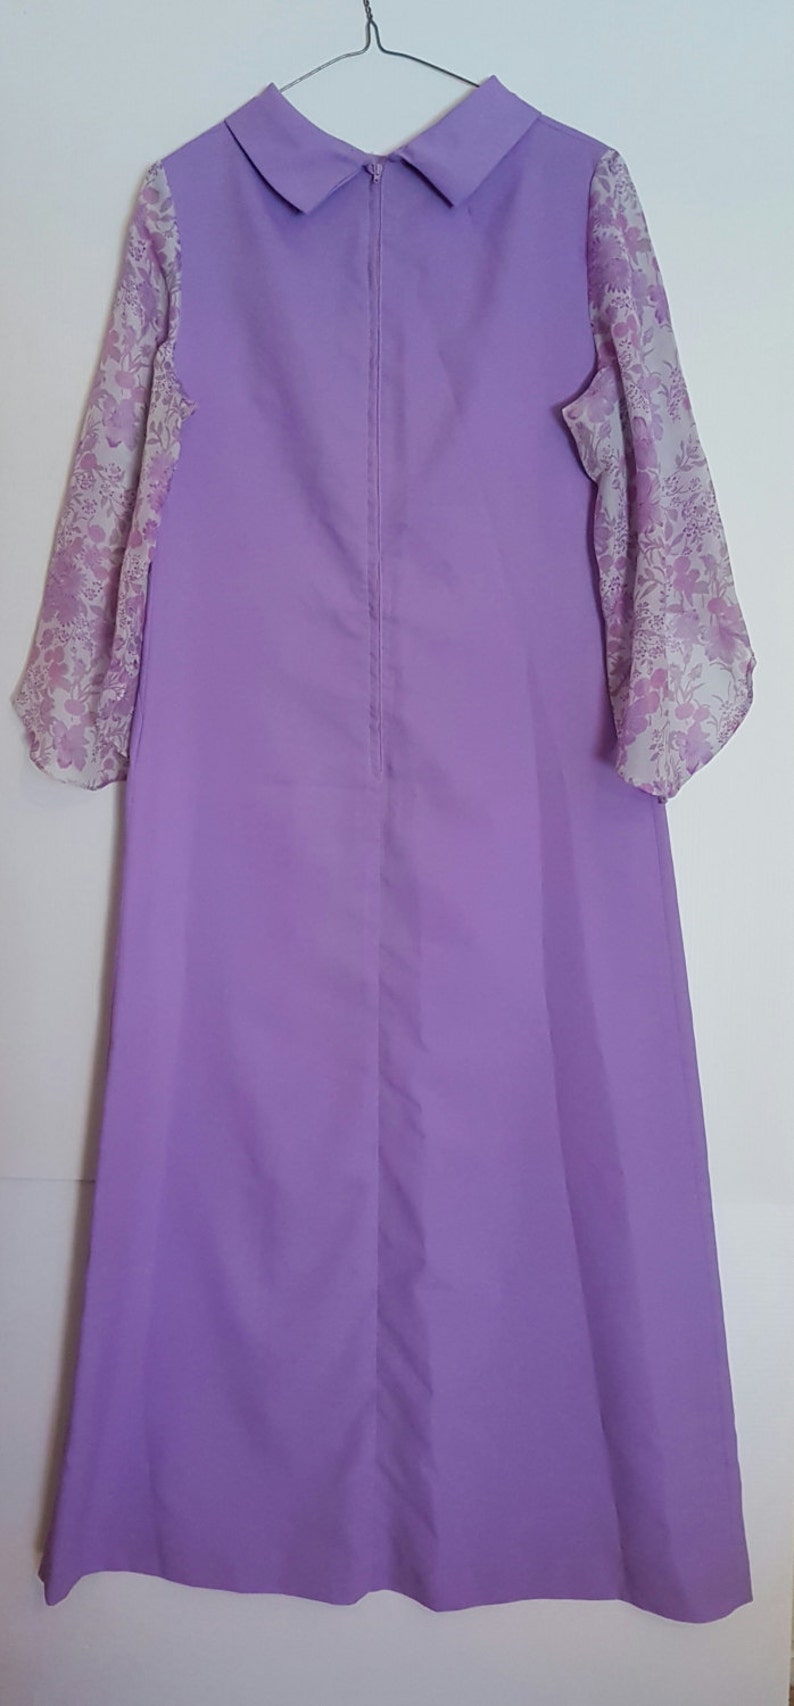 Vintage 1970s lilac purple mauve maxi dress with floral sheer sleeves image 4